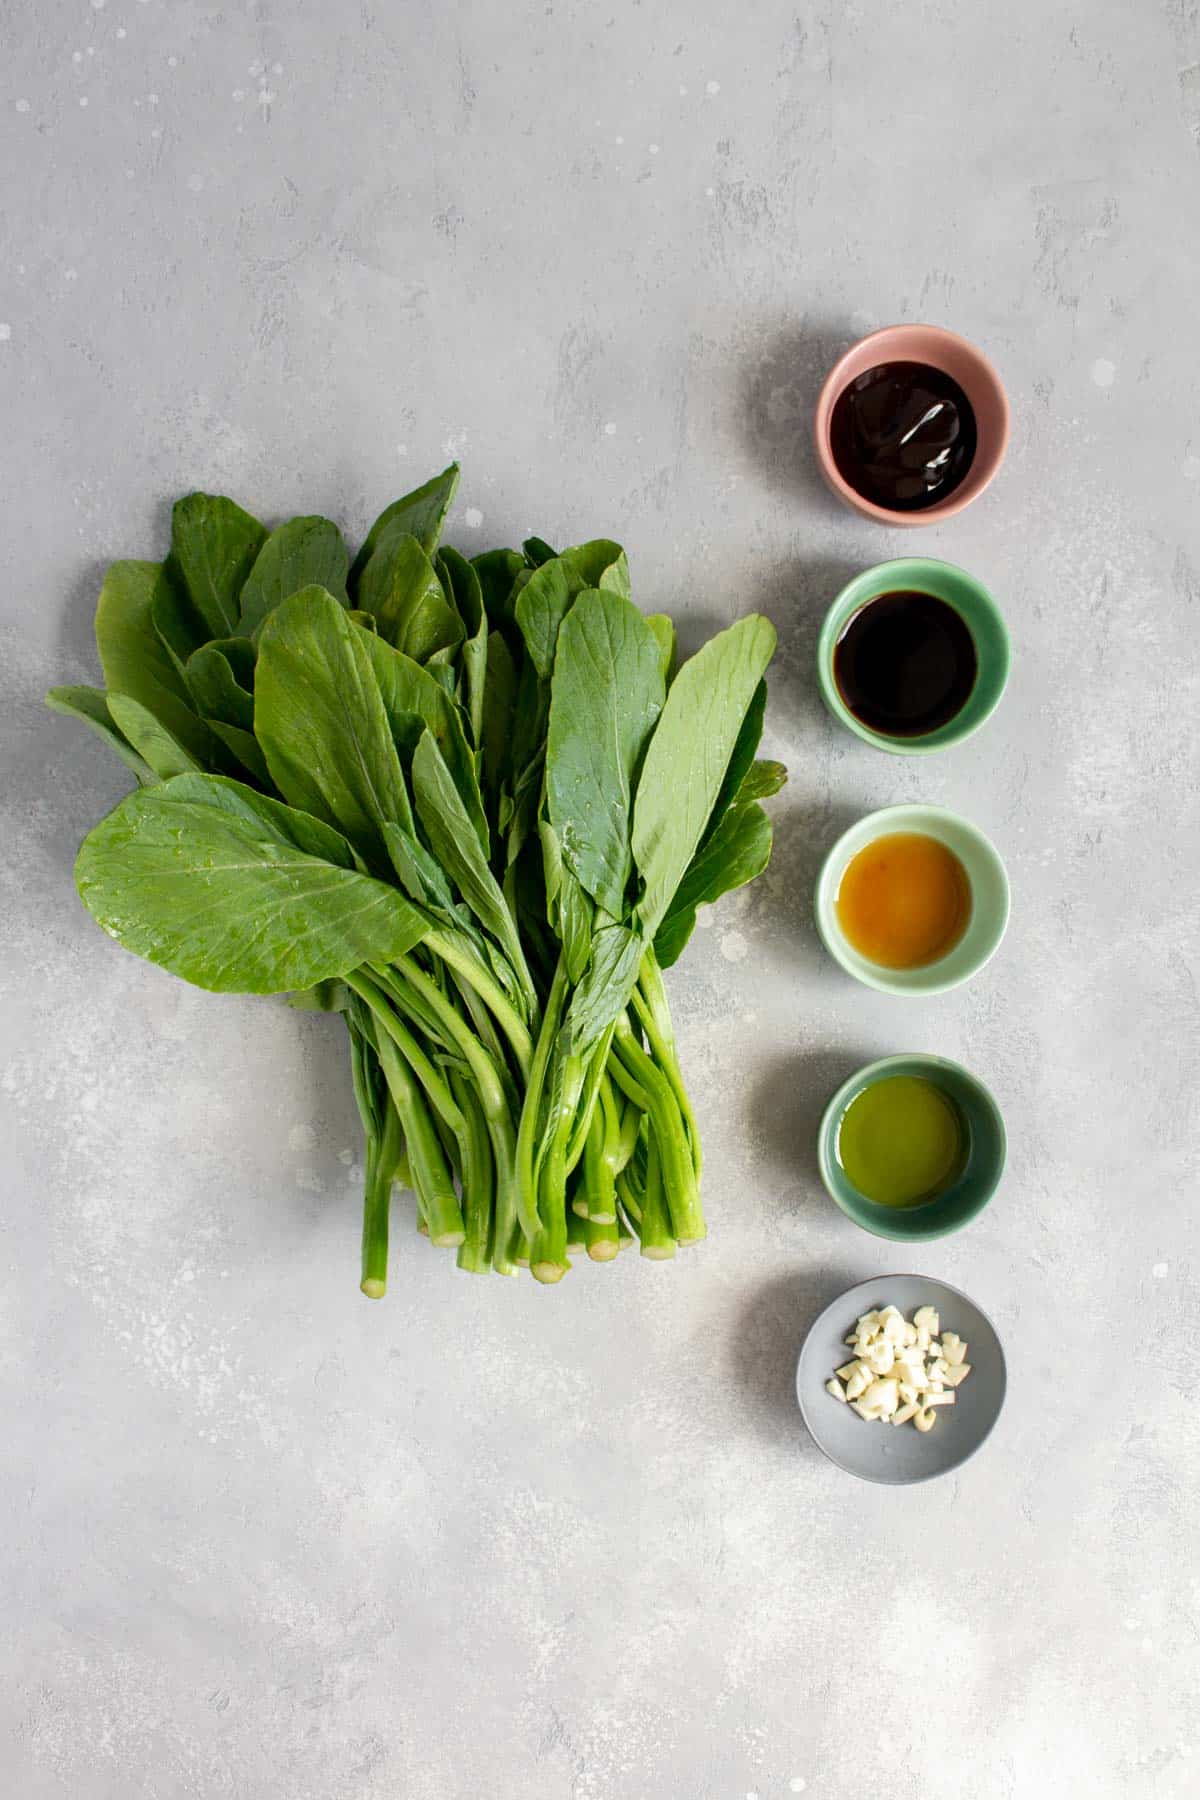 Ingredients needed to cook yu choy.